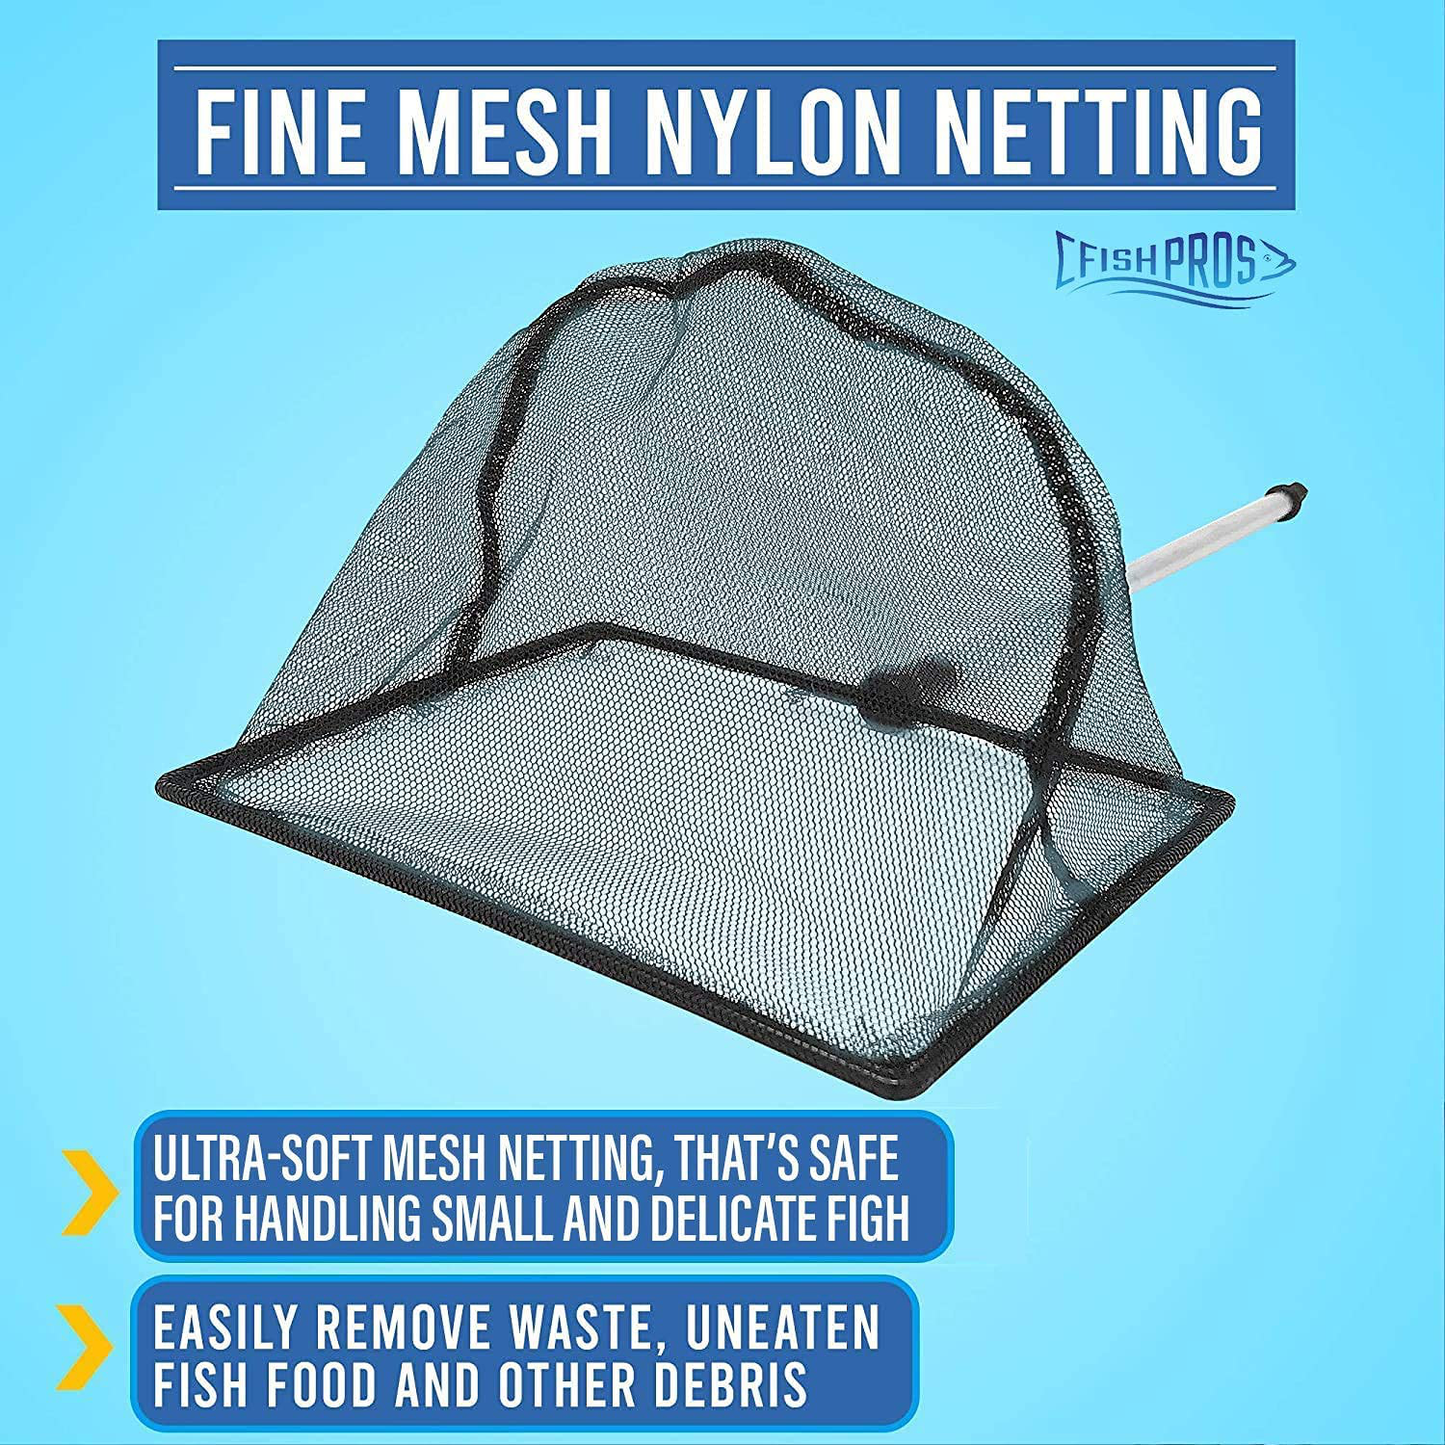 FISH PROS Fish Net for Fish Tank - 2.5 Inch Deep Mesh Scooper with Extendable Handle up to 24 Inches Long – Large Scoop, Telescopic Pond Skimmer Nets for Cleaning Tanks - Aquarium Accessories